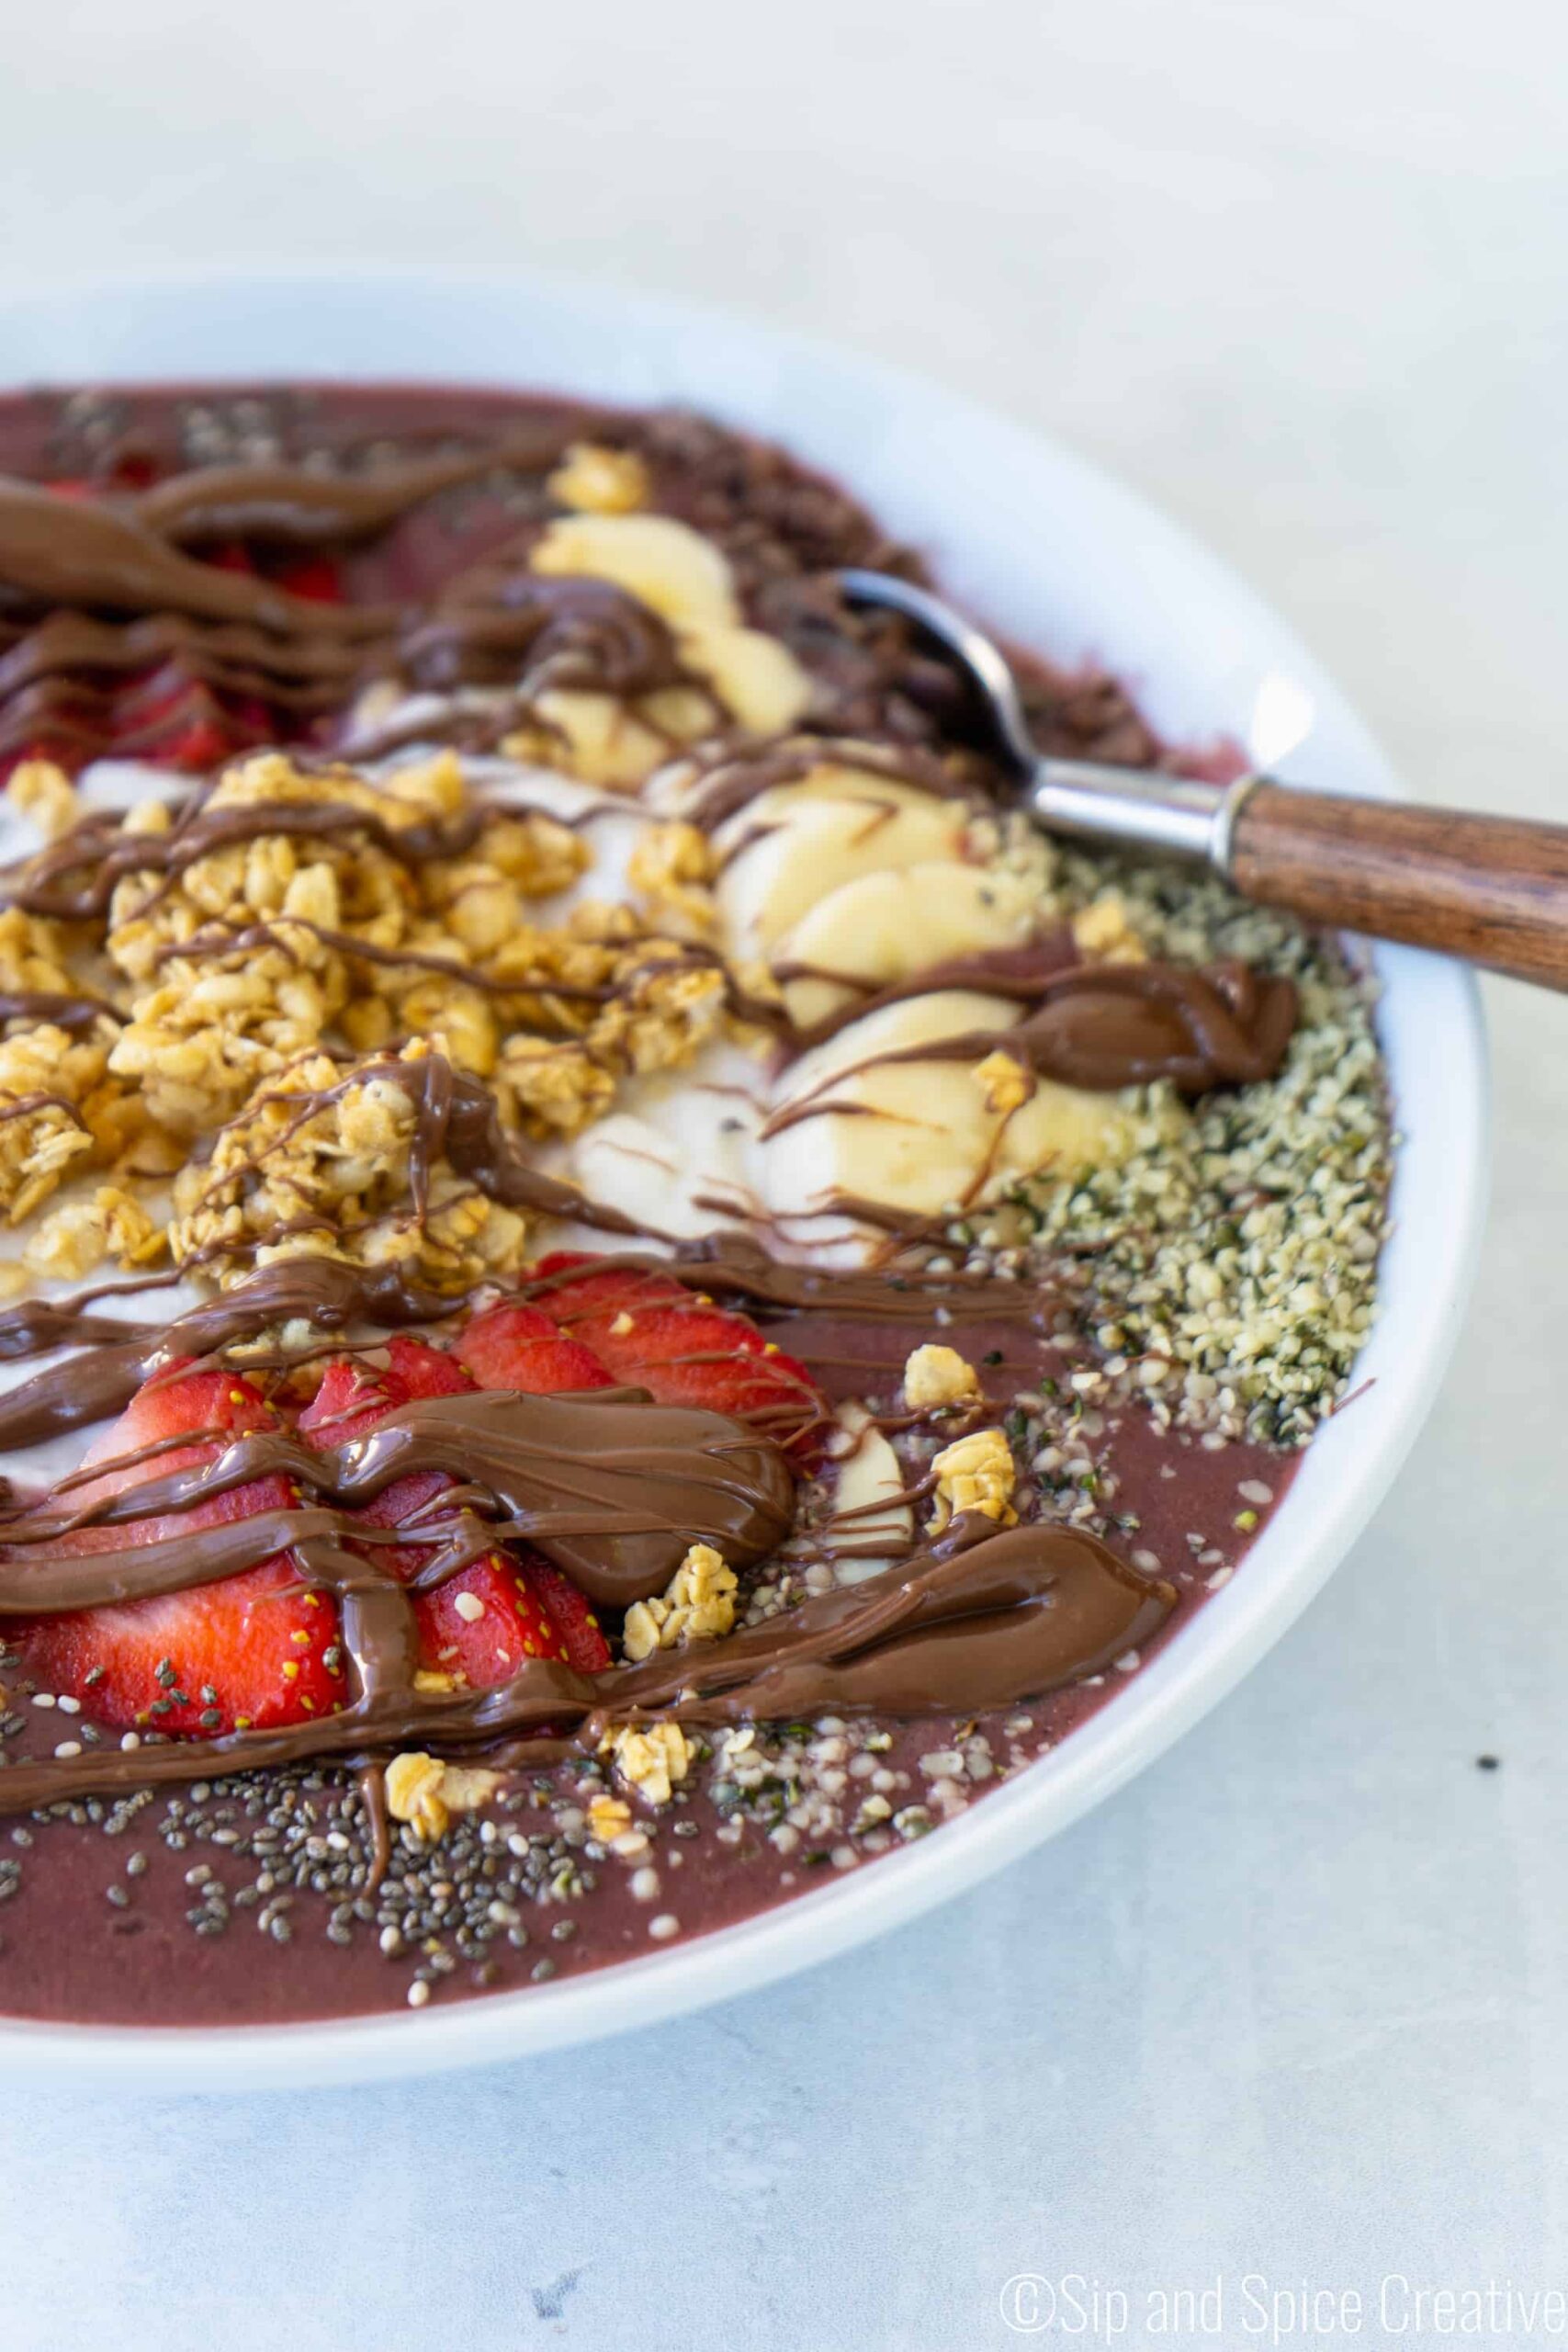 Nutella Acai Bowl Recipe + Tips for Making Acai Bowls   Sip and Spice